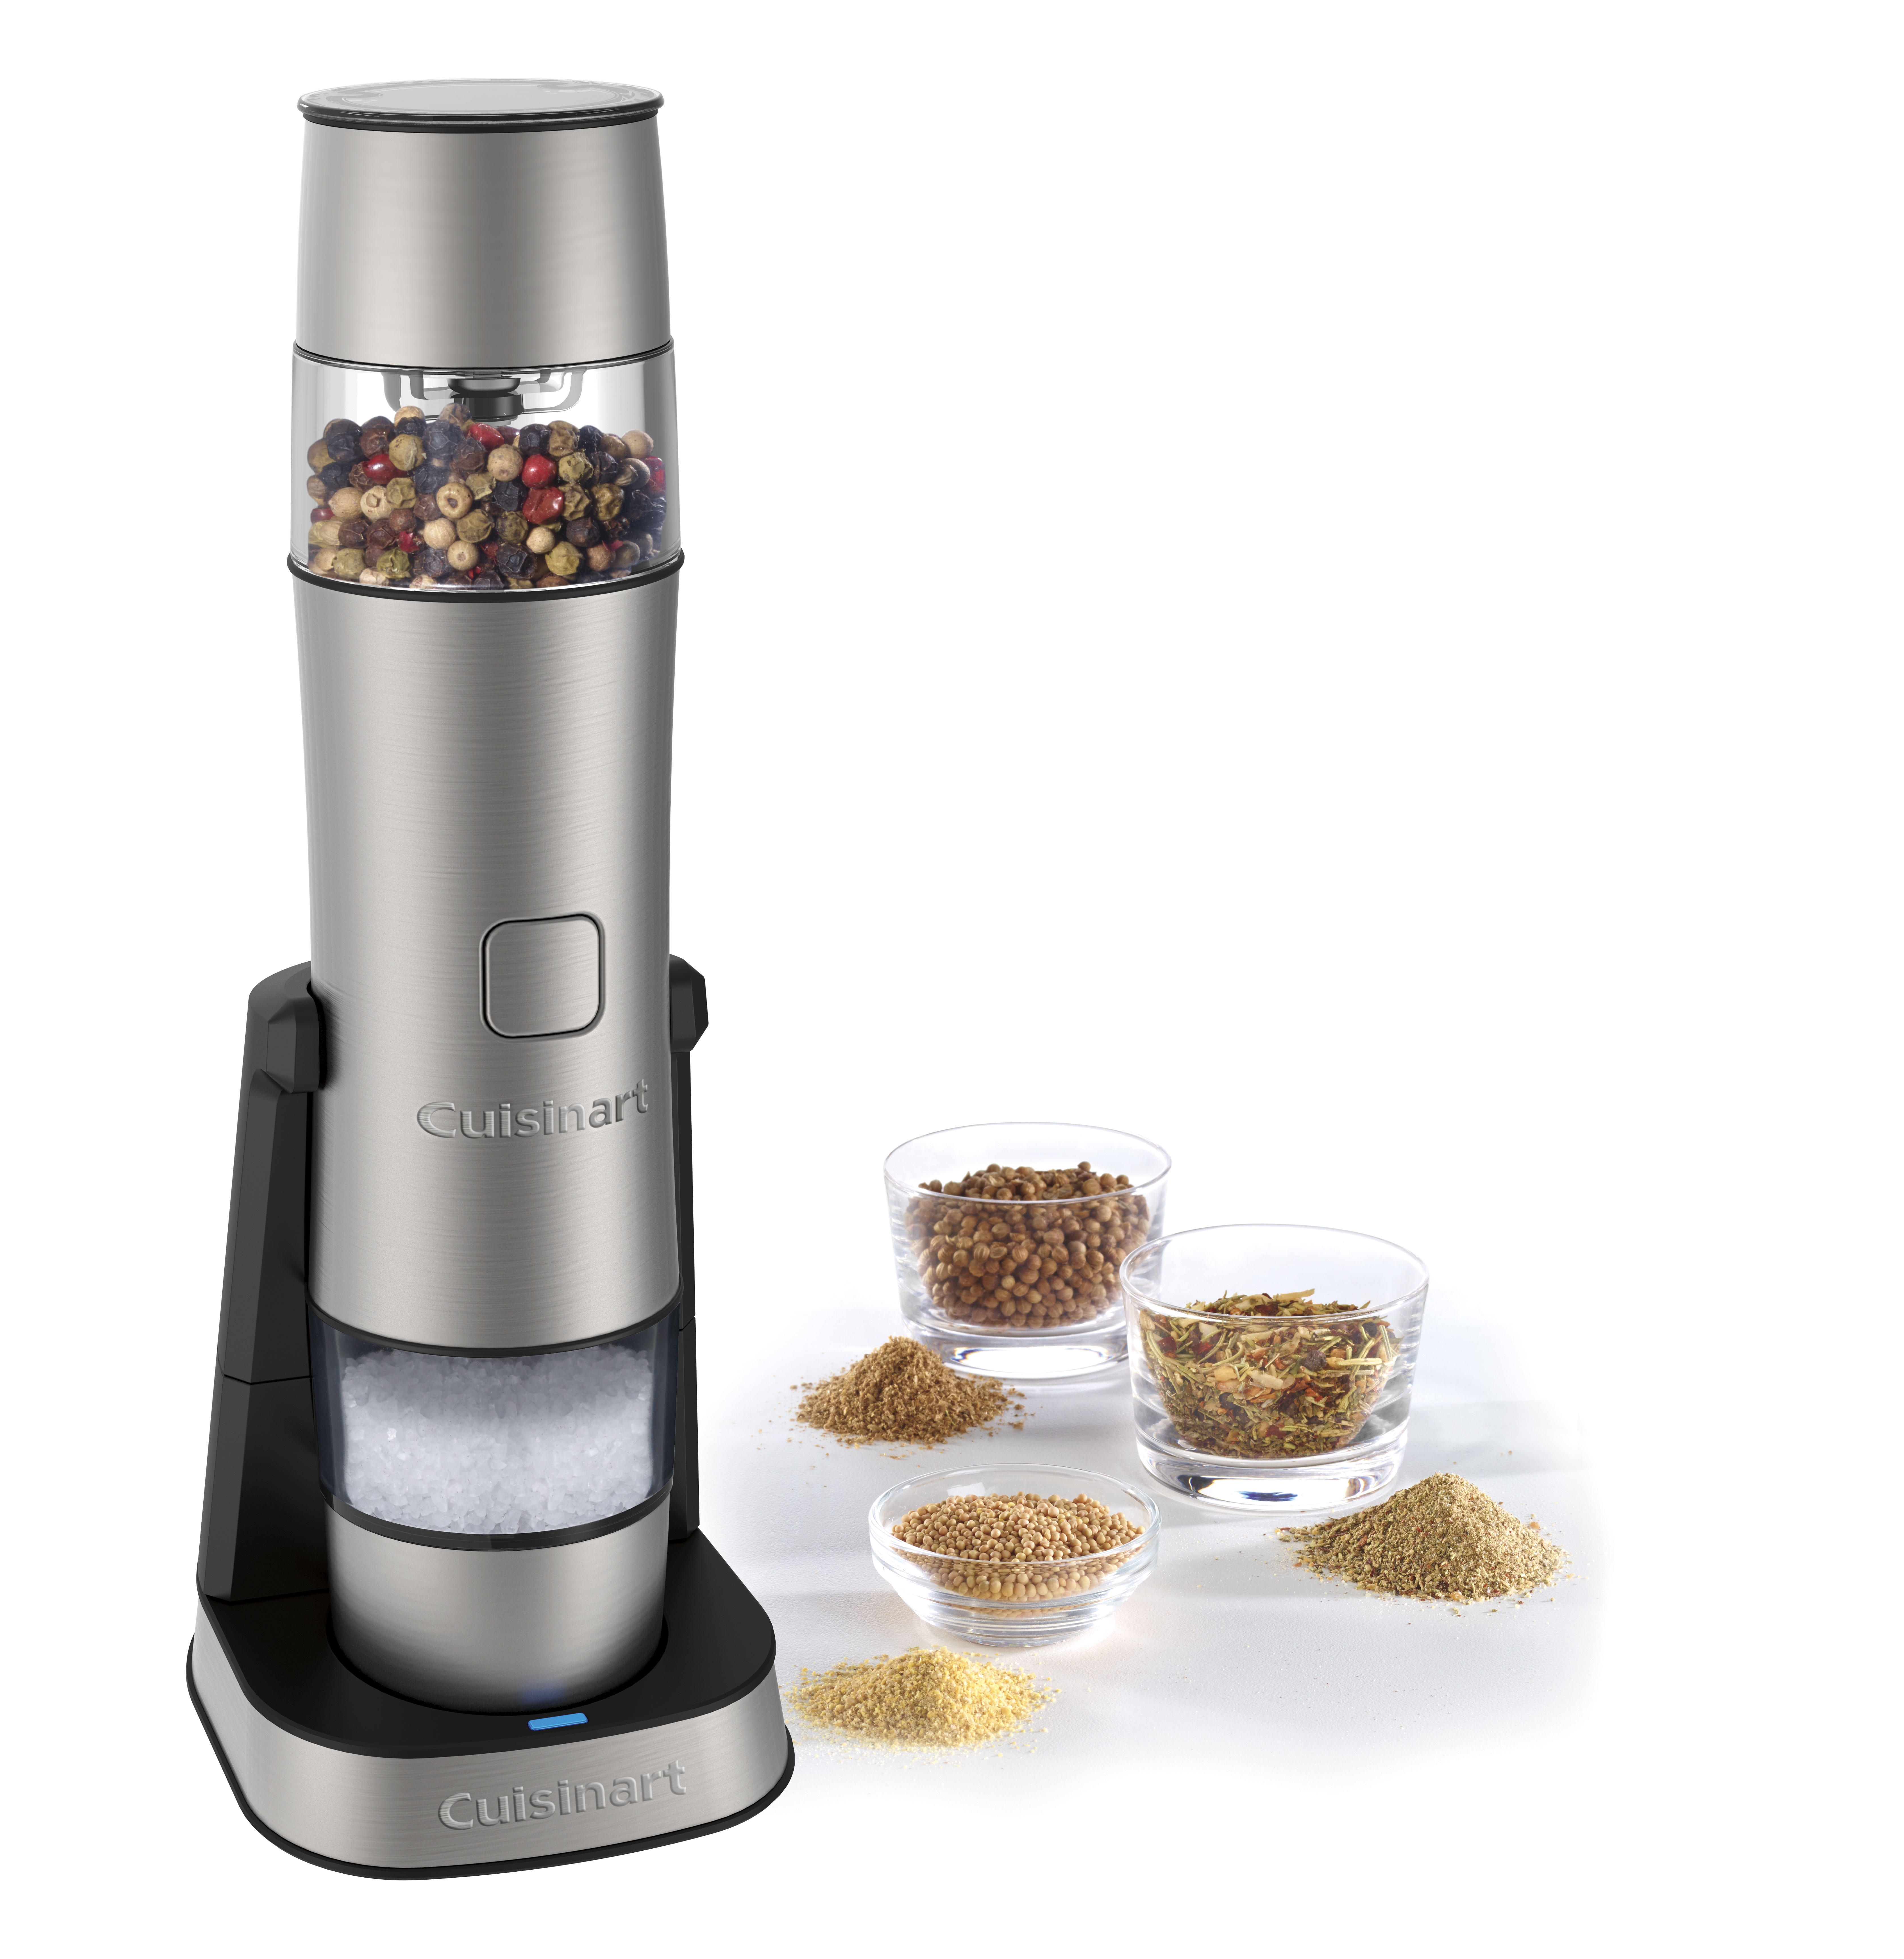 Rechargeable Salt, Pepper, and Spice Mill